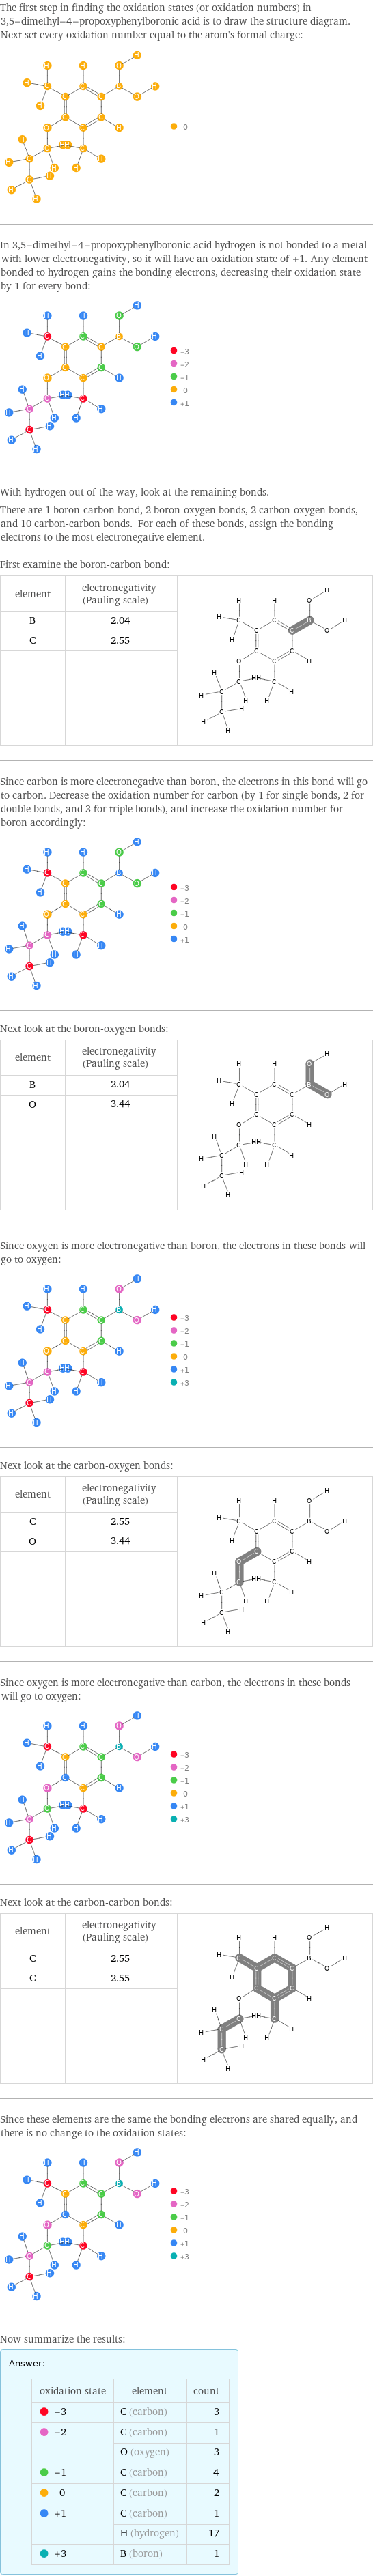 The first step in finding the oxidation states (or oxidation numbers) in 3, 5-dimethyl-4-propoxyphenylboronic acid is to draw the structure diagram. Next set every oxidation number equal to the atom's formal charge:  In 3, 5-dimethyl-4-propoxyphenylboronic acid hydrogen is not bonded to a metal with lower electronegativity, so it will have an oxidation state of +1. Any element bonded to hydrogen gains the bonding electrons, decreasing their oxidation state by 1 for every bond:  With hydrogen out of the way, look at the remaining bonds. There are 1 boron-carbon bond, 2 boron-oxygen bonds, 2 carbon-oxygen bonds, and 10 carbon-carbon bonds. For each of these bonds, assign the bonding electrons to the most electronegative element.  First examine the boron-carbon bond: element | electronegativity (Pauling scale) |  B | 2.04 |  C | 2.55 |   | |  Since carbon is more electronegative than boron, the electrons in this bond will go to carbon. Decrease the oxidation number for carbon (by 1 for single bonds, 2 for double bonds, and 3 for triple bonds), and increase the oxidation number for boron accordingly:  Next look at the boron-oxygen bonds: element | electronegativity (Pauling scale) |  B | 2.04 |  O | 3.44 |   | |  Since oxygen is more electronegative than boron, the electrons in these bonds will go to oxygen:  Next look at the carbon-oxygen bonds: element | electronegativity (Pauling scale) |  C | 2.55 |  O | 3.44 |   | |  Since oxygen is more electronegative than carbon, the electrons in these bonds will go to oxygen:  Next look at the carbon-carbon bonds: element | electronegativity (Pauling scale) |  C | 2.55 |  C | 2.55 |   | |  Since these elements are the same the bonding electrons are shared equally, and there is no change to the oxidation states:  Now summarize the results: Answer: |   | oxidation state | element | count  -3 | C (carbon) | 3  -2 | C (carbon) | 1  | O (oxygen) | 3  -1 | C (carbon) | 4  0 | C (carbon) | 2  +1 | C (carbon) | 1  | H (hydrogen) | 17  +3 | B (boron) | 1